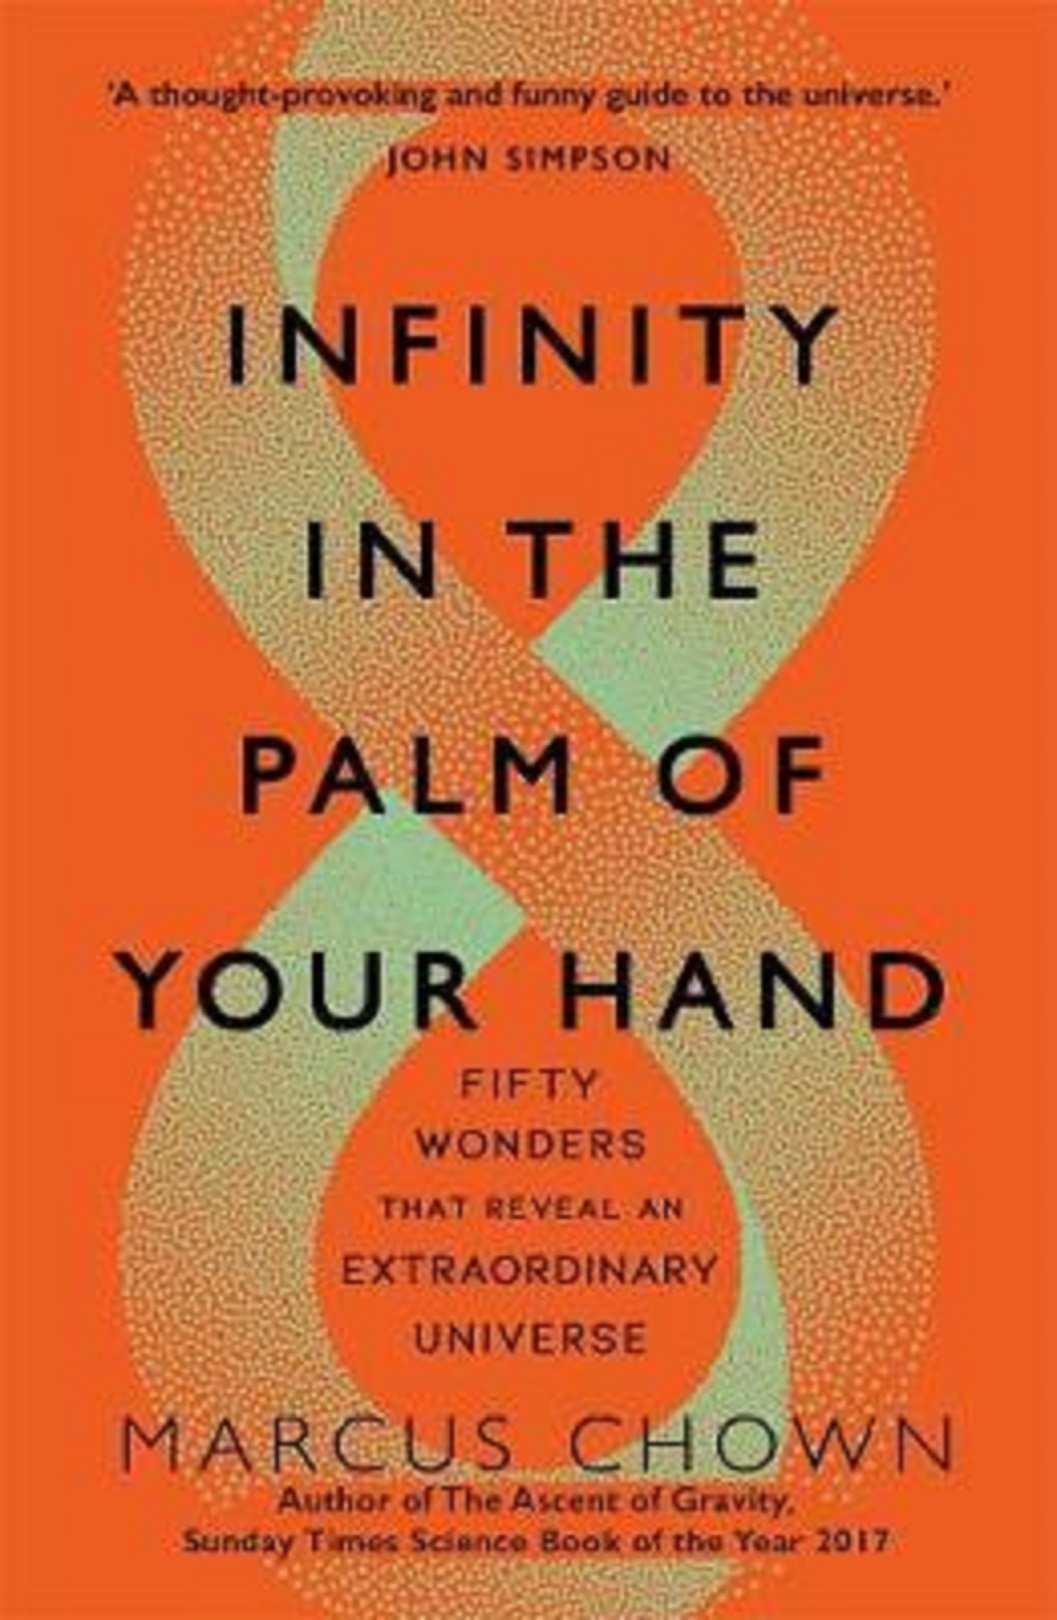 Infinity in the Palm of Your Hand